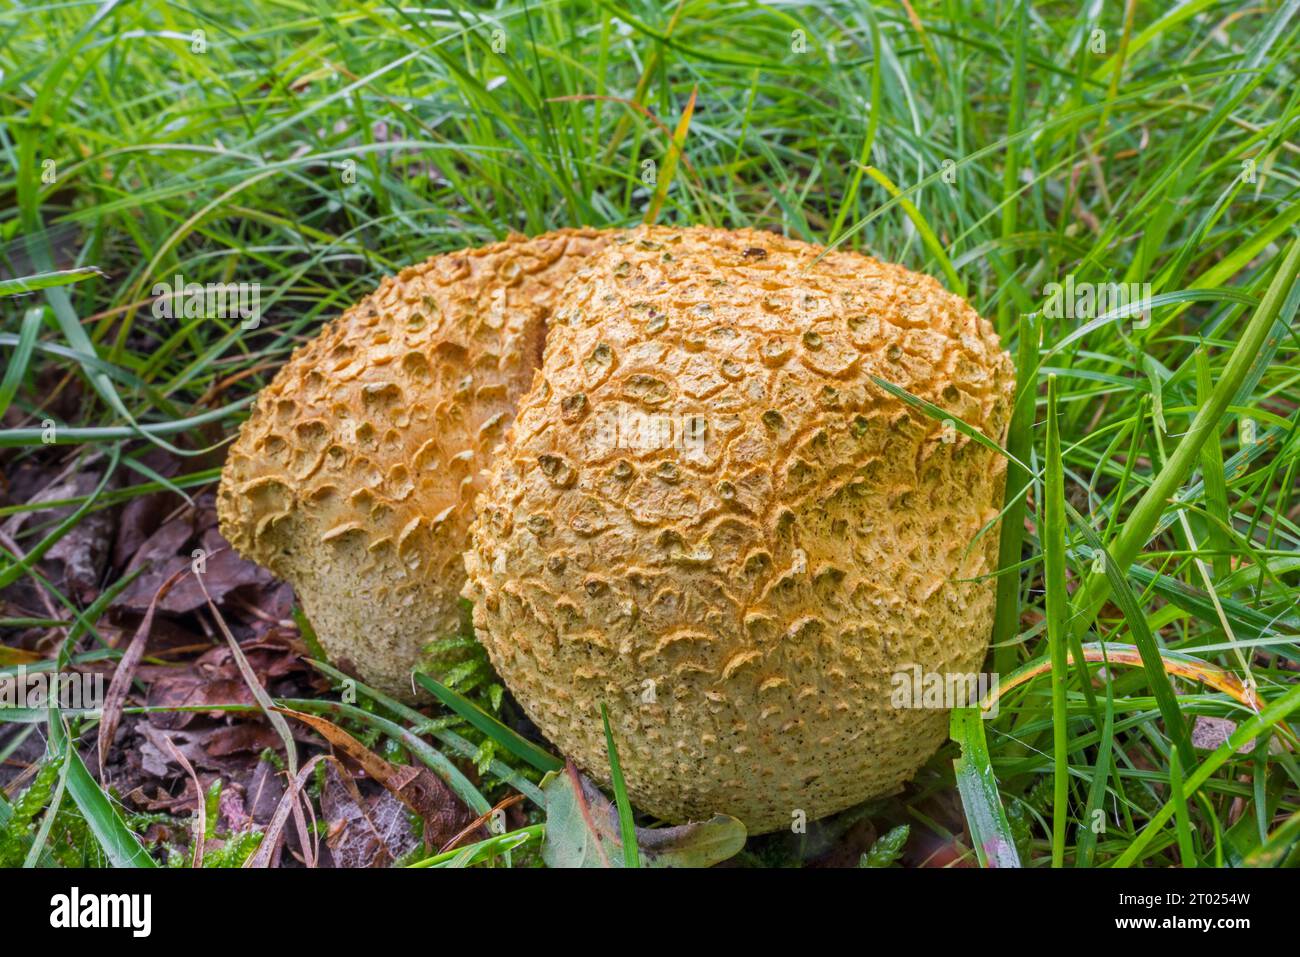 Common earthball / pigskin poison puffball / common earth ball (Scleroderma citrinum / Scleroderma aurantium) in the grass in autumn forest Stock Photo